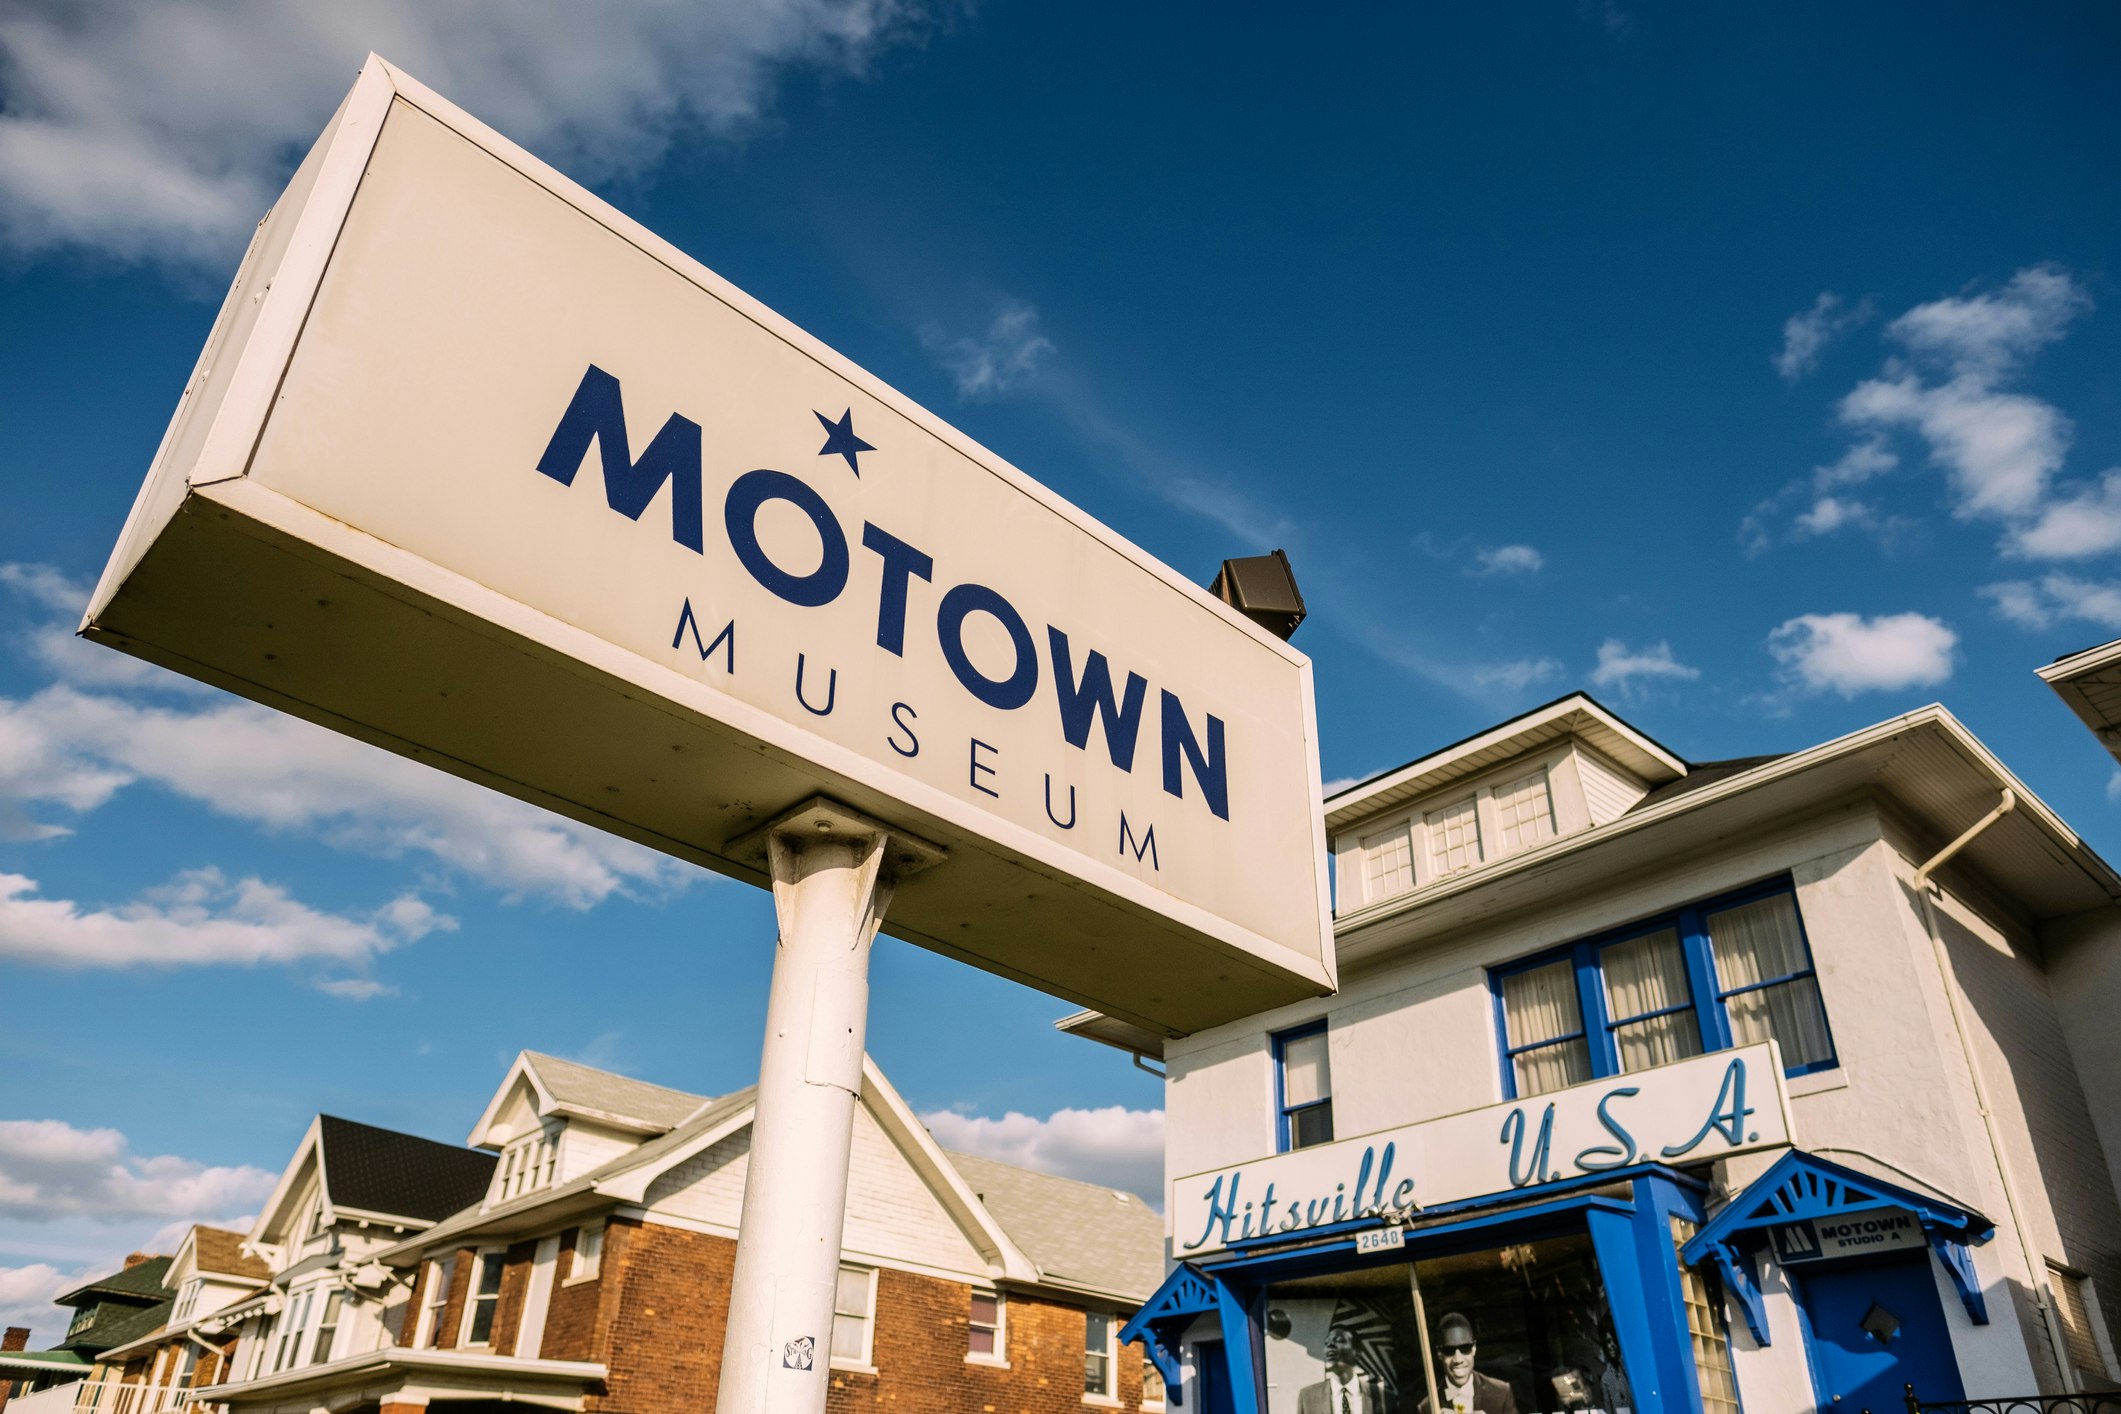 Exterior of Motown Museum-Hitsville USA. Original location of Motown Music production. Established in 1958 by Berry Gordy Jr., this record company was the place that established many recording stars of that era.